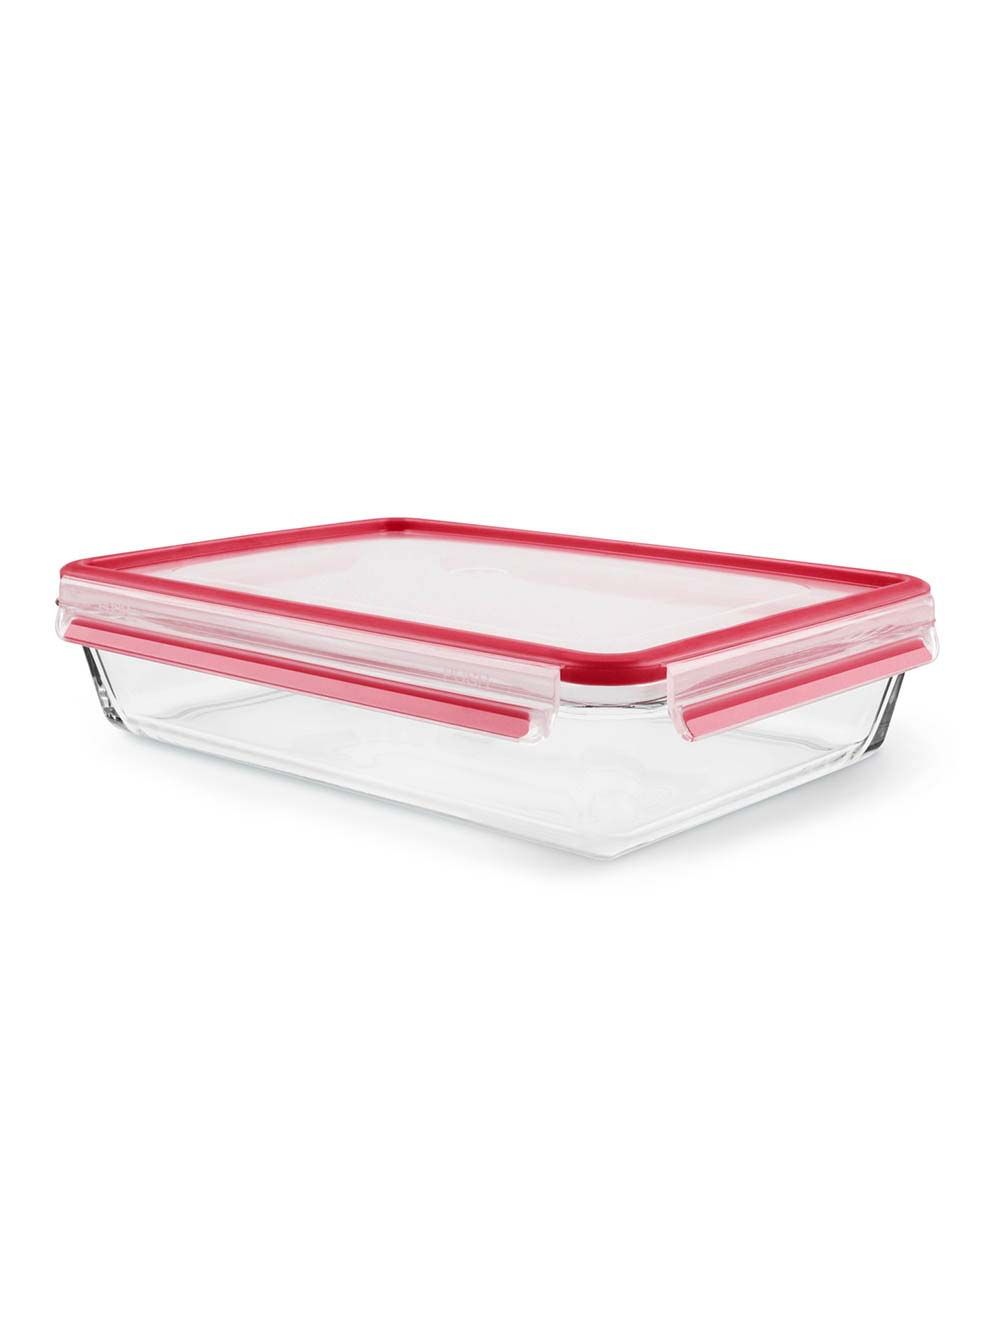 Tefal Masterseal Glass Square 0.2 L Food Container, K3010112